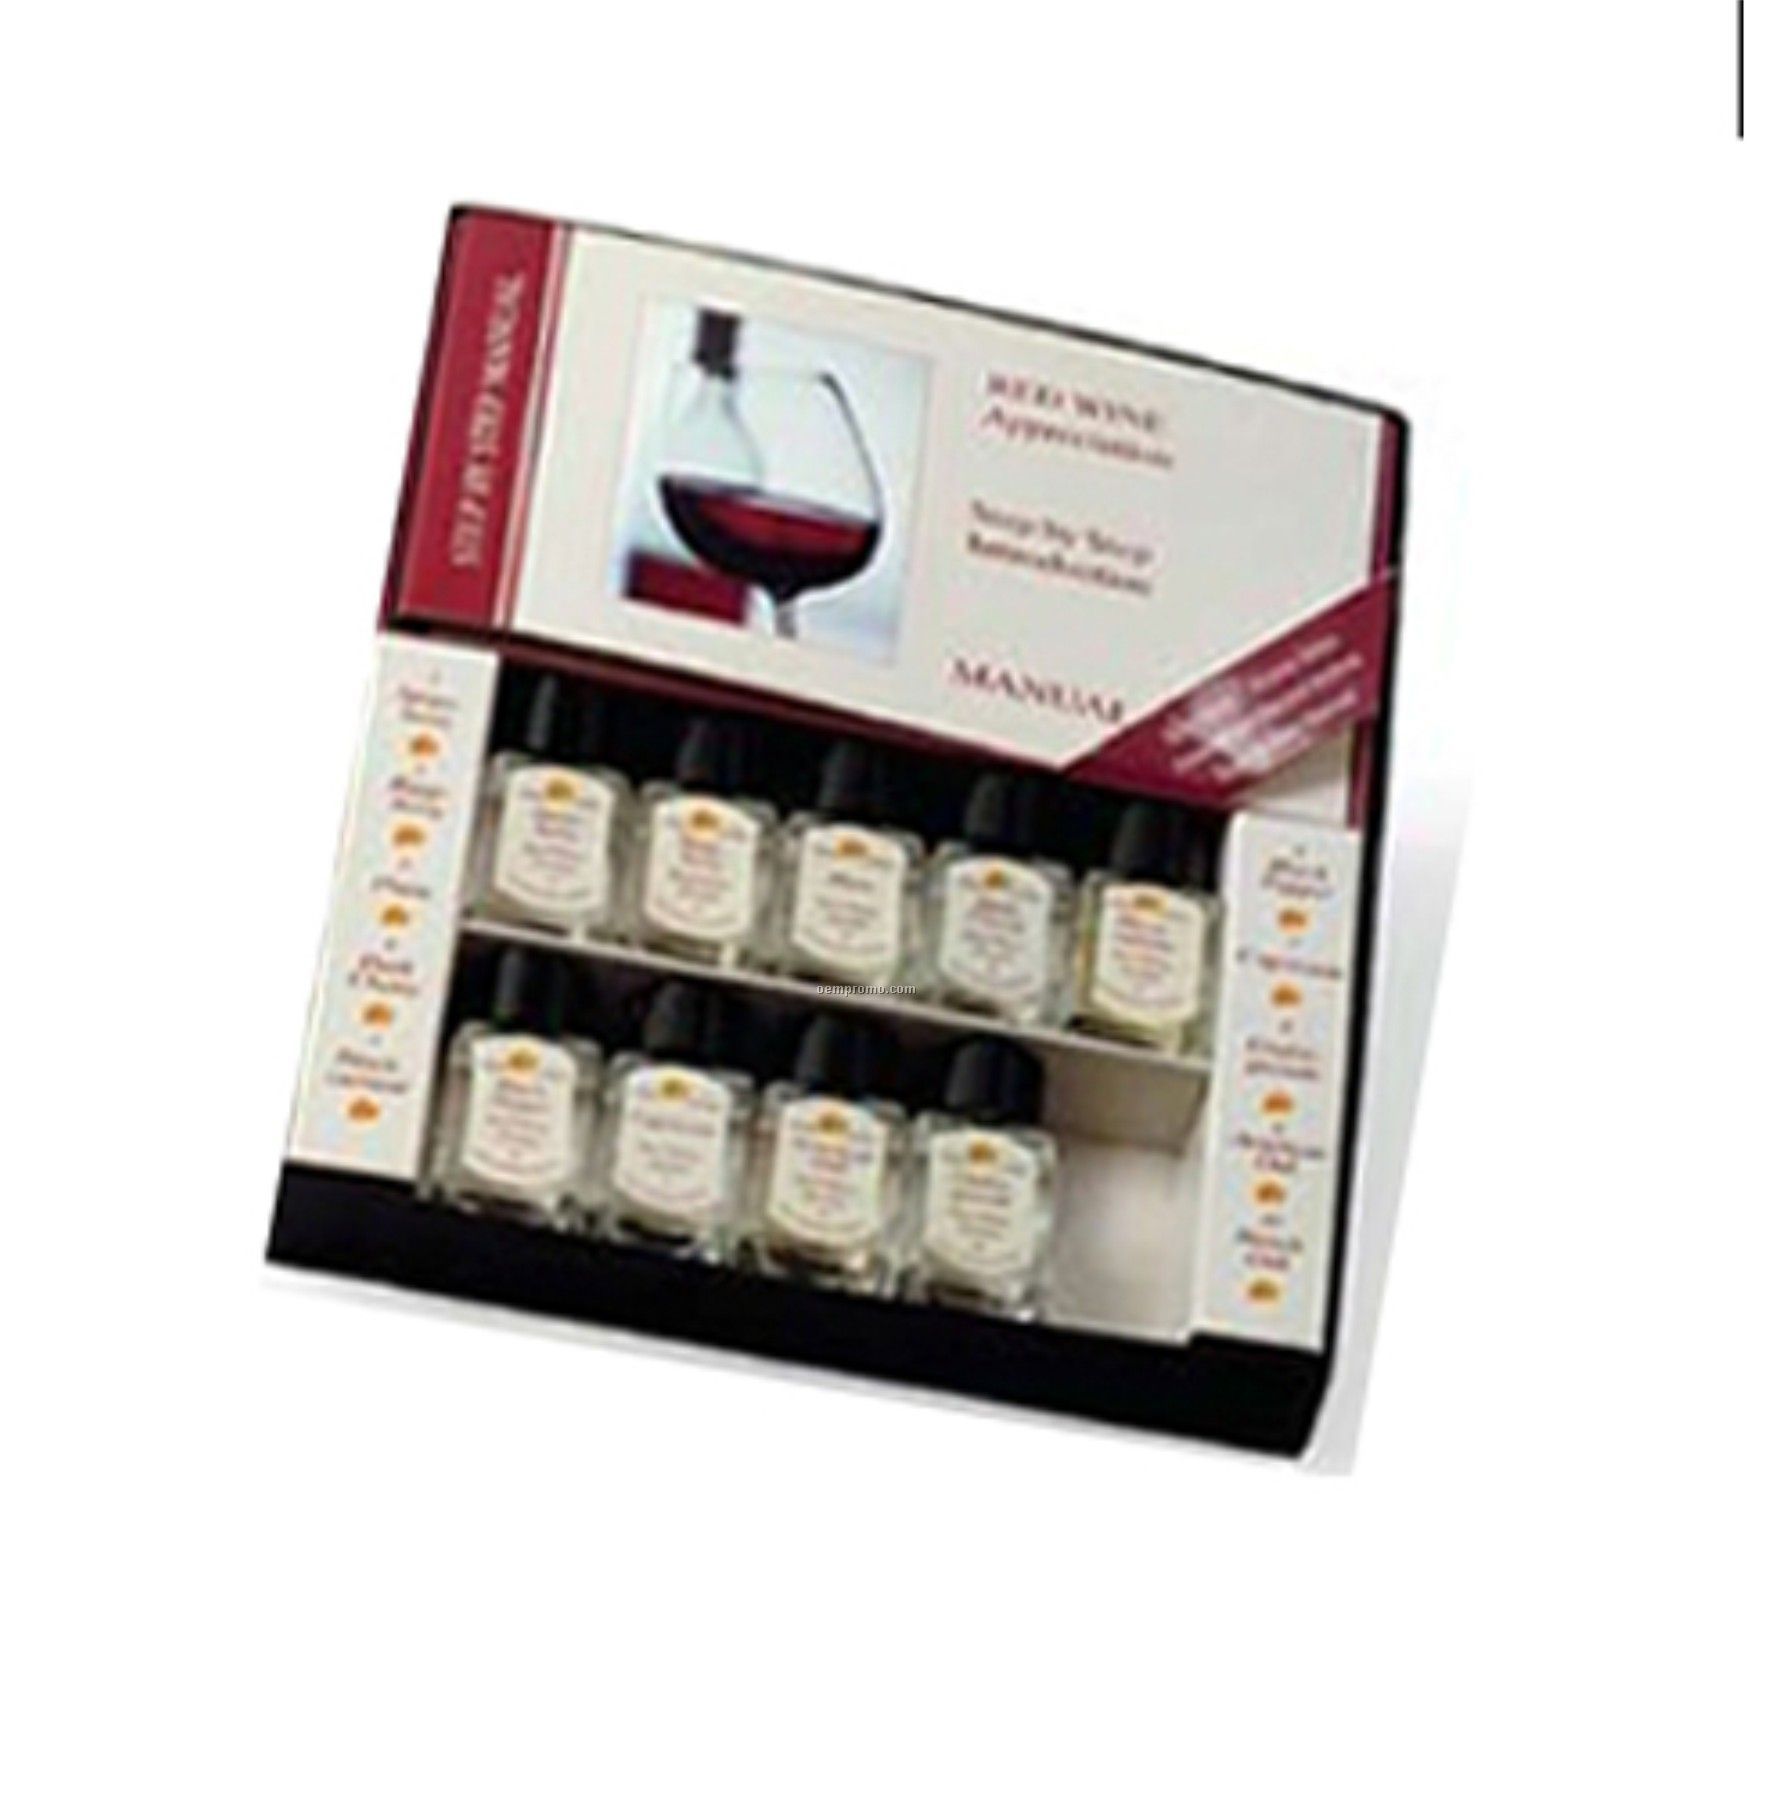 Introduction To Red Wine Appreciation Kit With 10 Aroma Bottles & Book